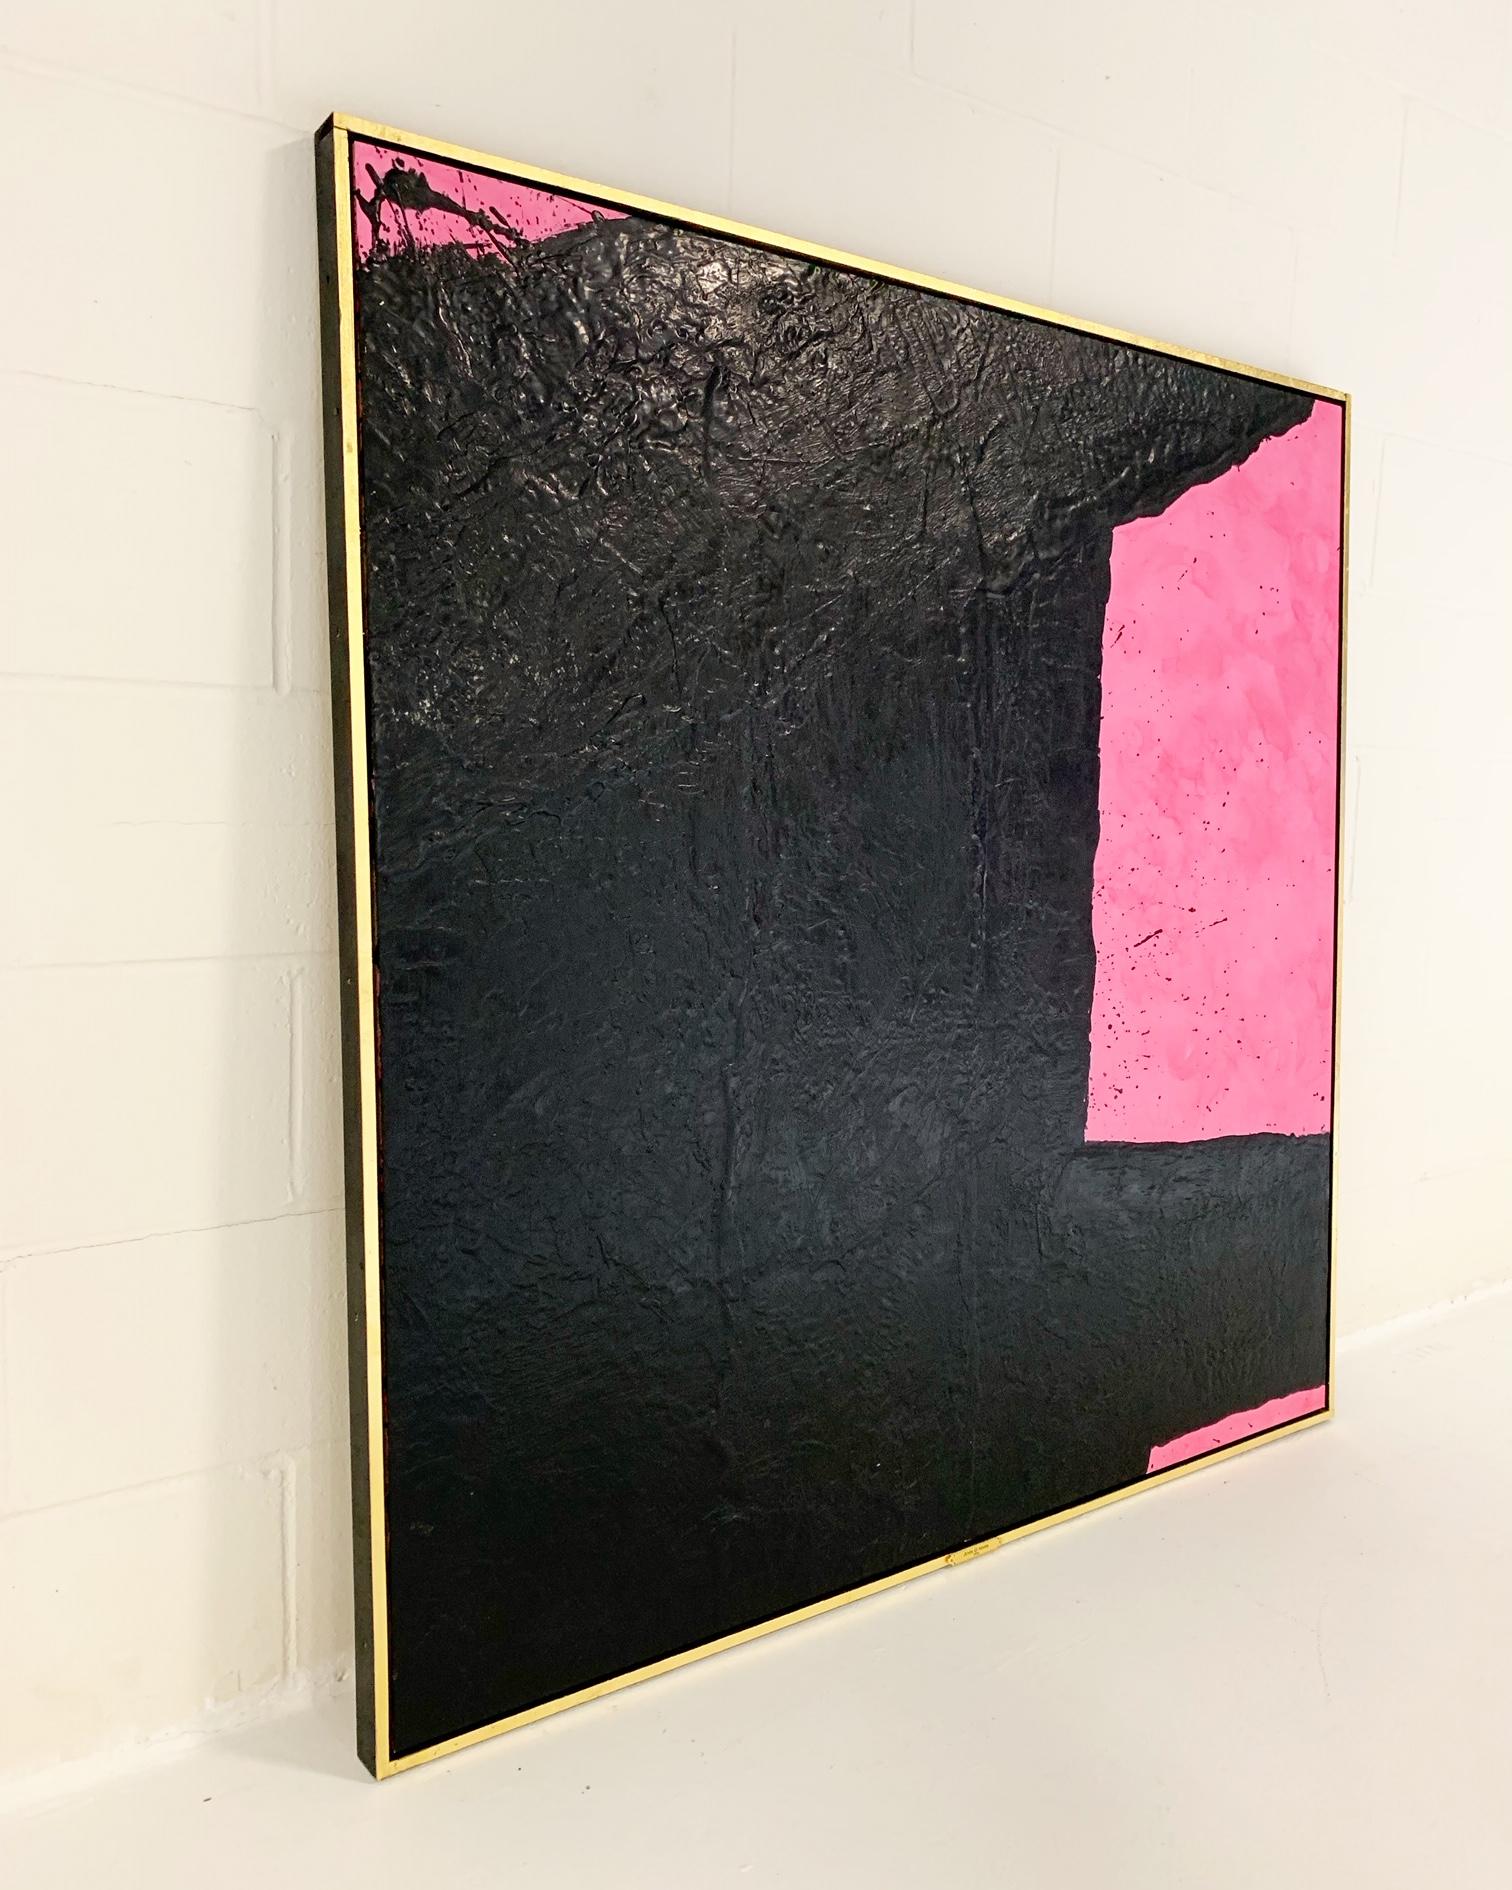 John O'Hara. 2019. Encaustic on board. Artist made frame, gold leaf on pine. In series.

Forsyth is proud to represent John O’Hara, a self-taught artist from Saint Louis whose work is found in some of the most beautiful rooms on Earth. His large